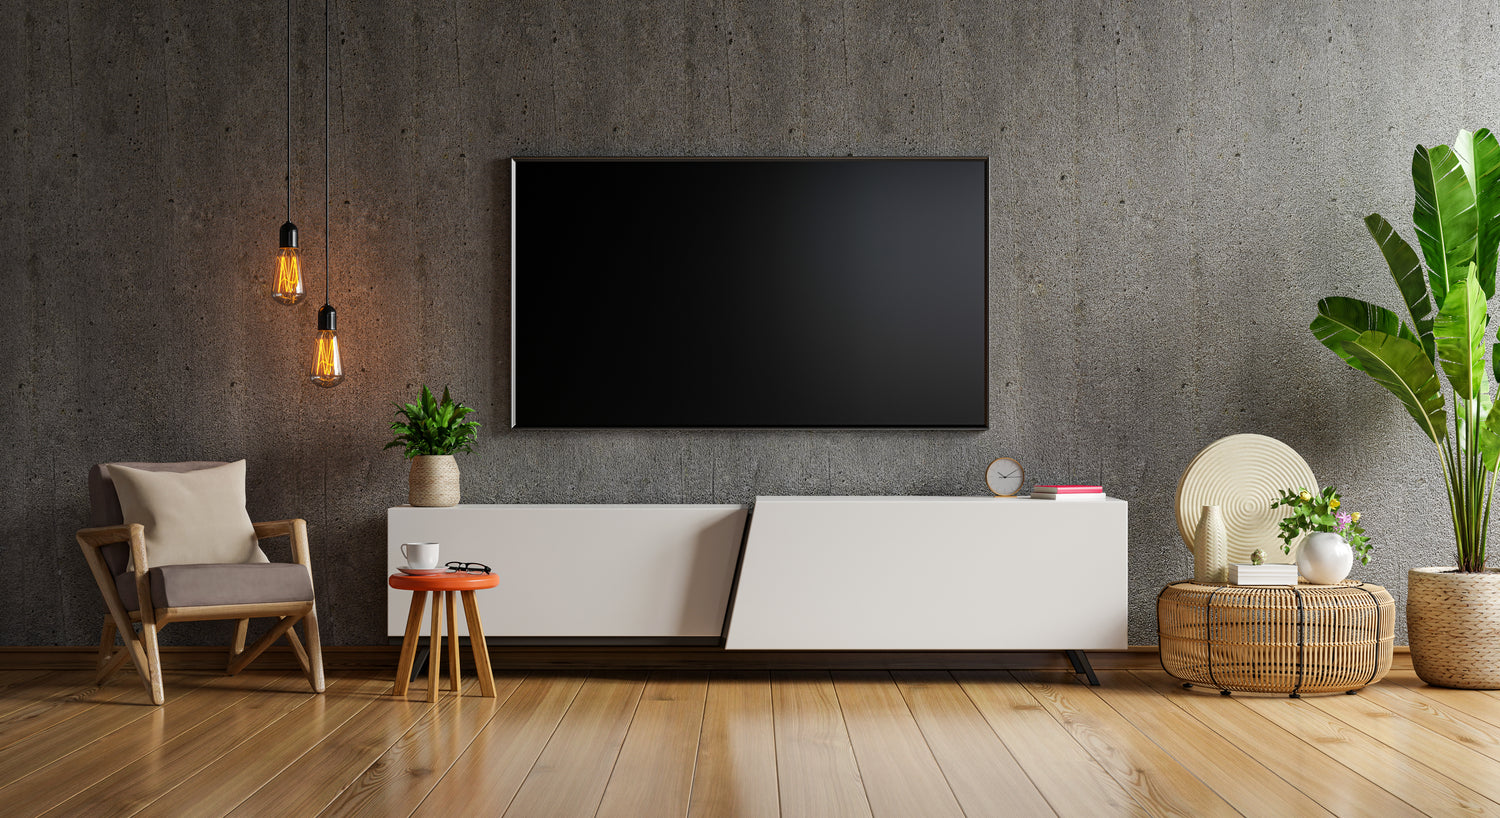 What is a fixed TV wall mount?